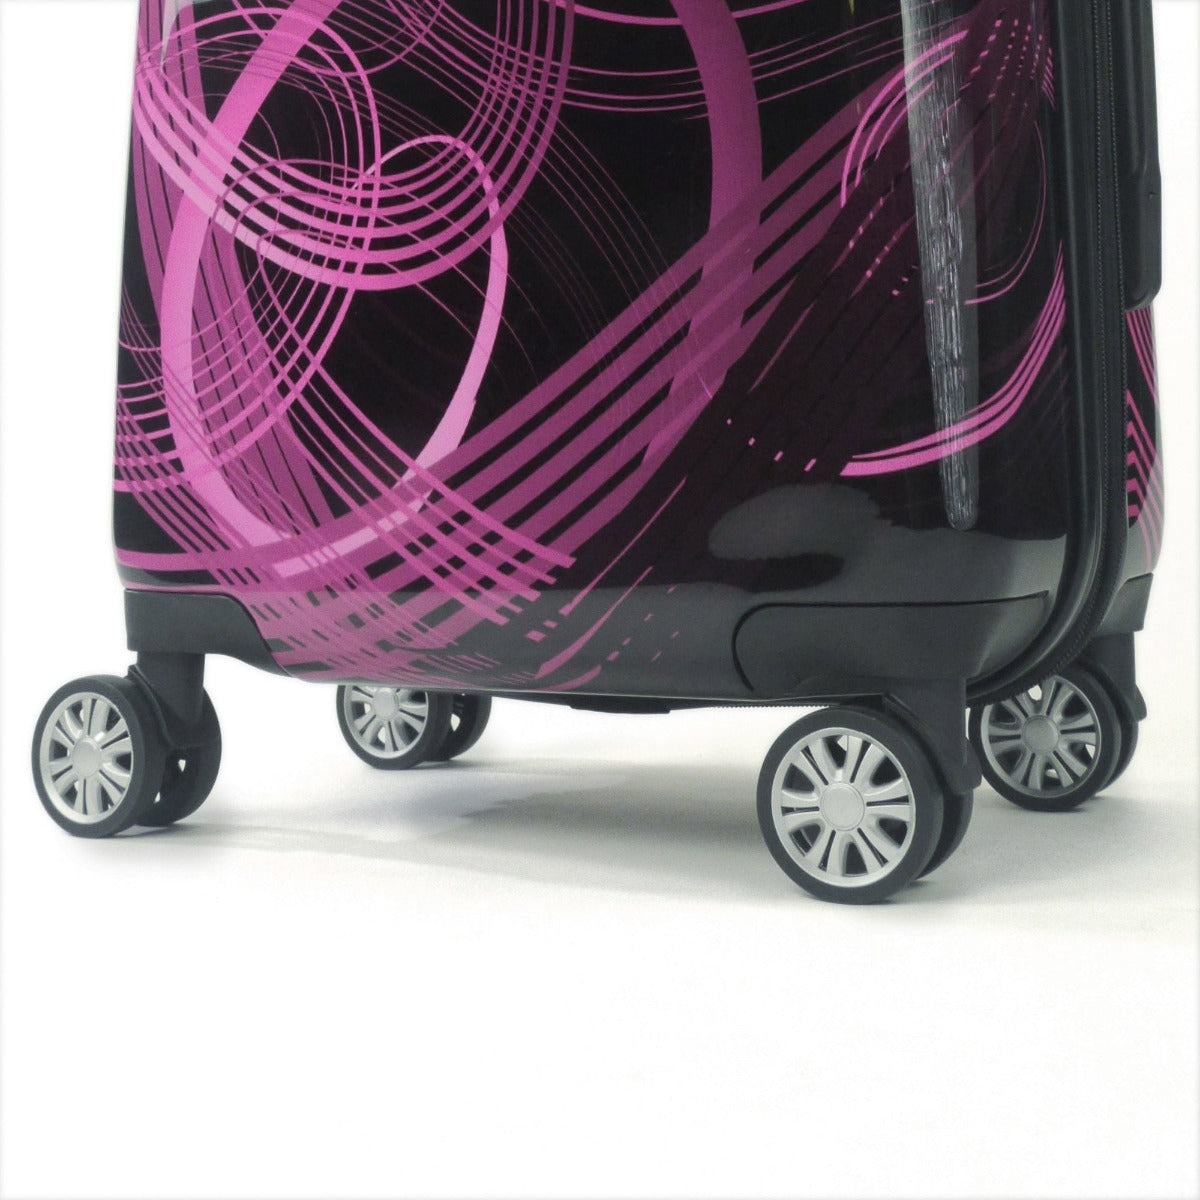 FUL Rolling Luggage Pink Neon Laser 24" Pink and Black 8 spinner wheels